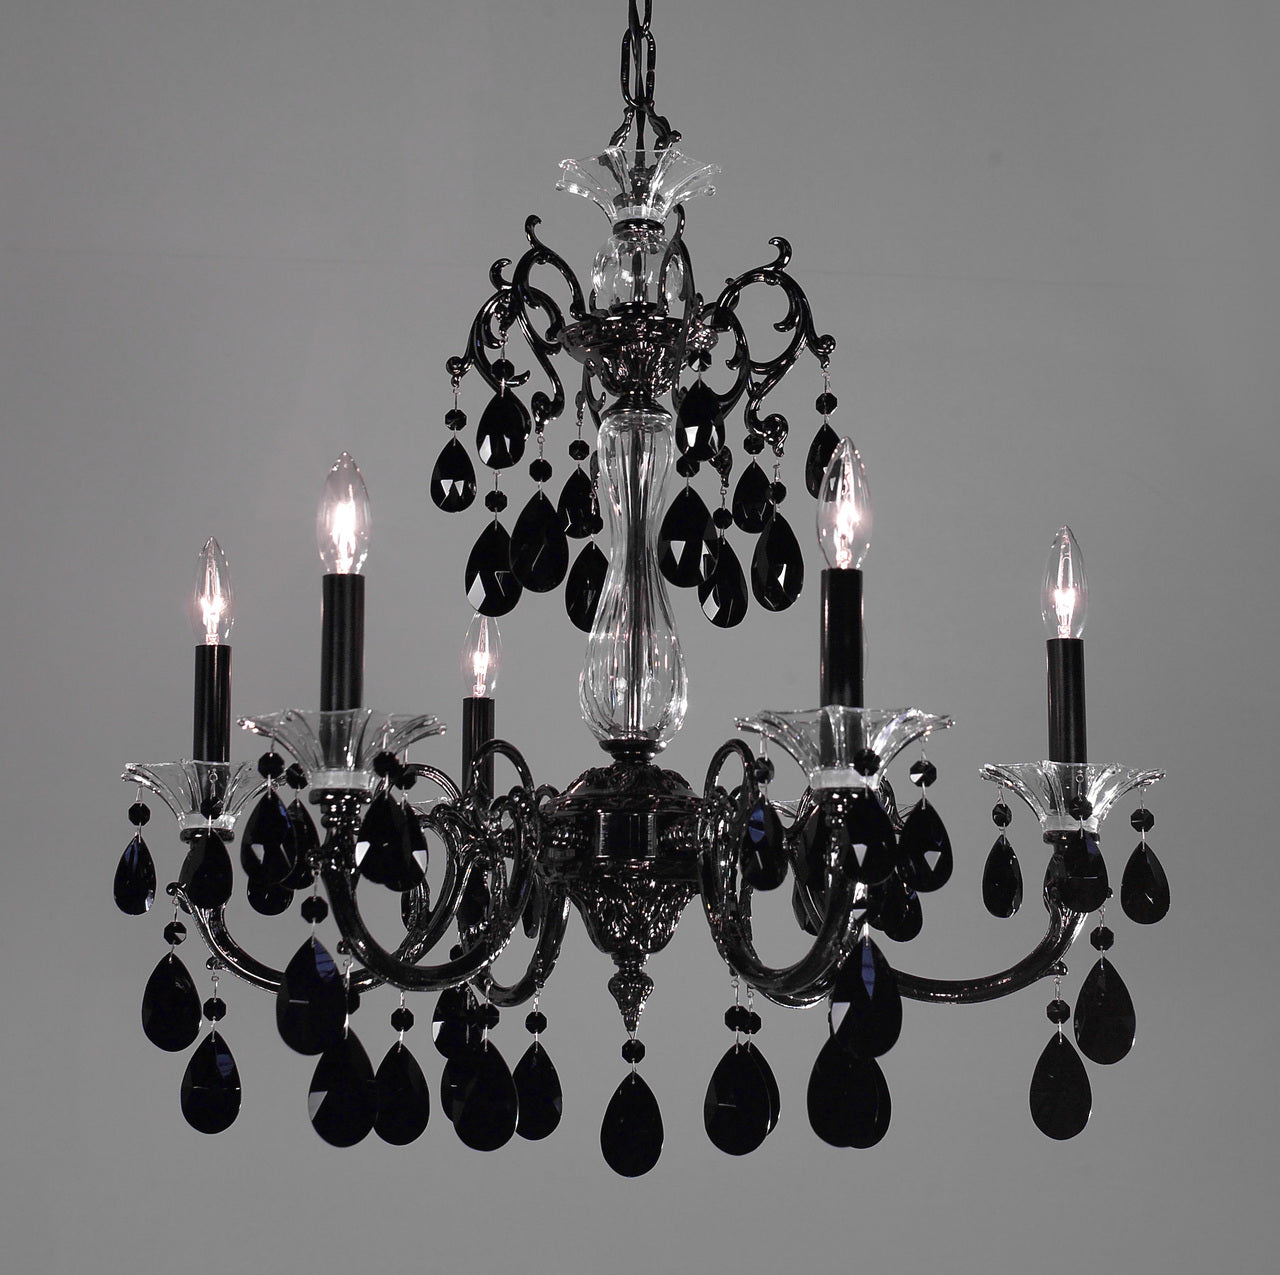 Classic Lighting 57056 CHP SC Via Lombardi Crystal Chandelier in Champagne Pearl (Imported from Spain)